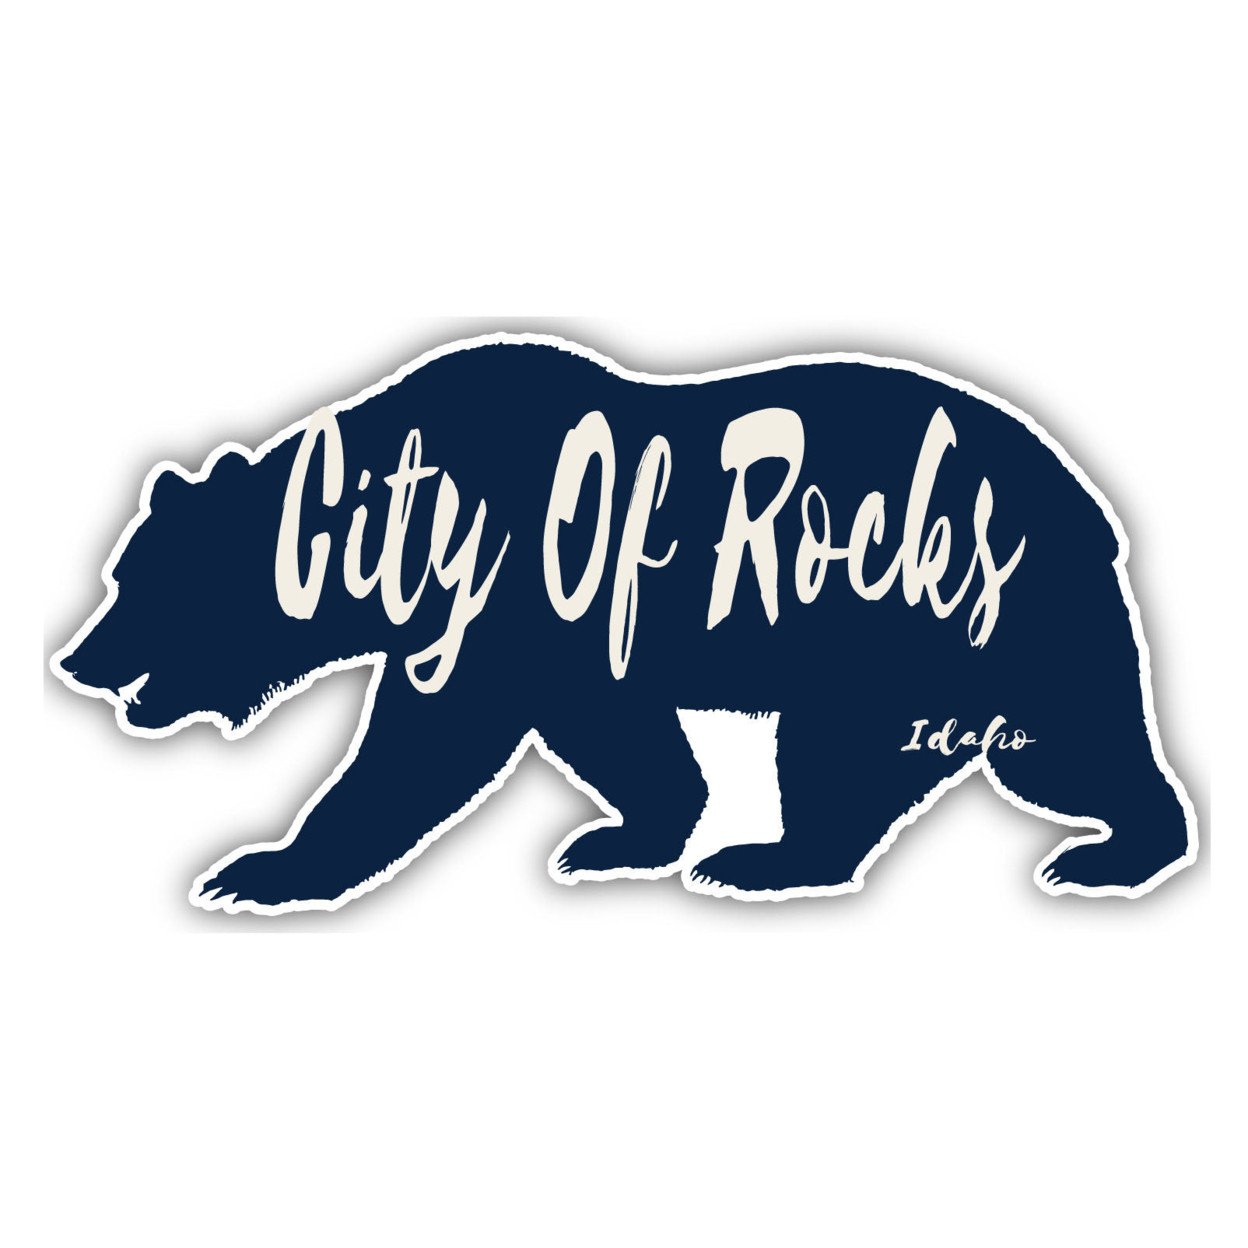 City Of Rocks Idaho Souvenir Decorative Stickers (Choose Theme And Size) - 4-Pack, 2-Inch, Bear